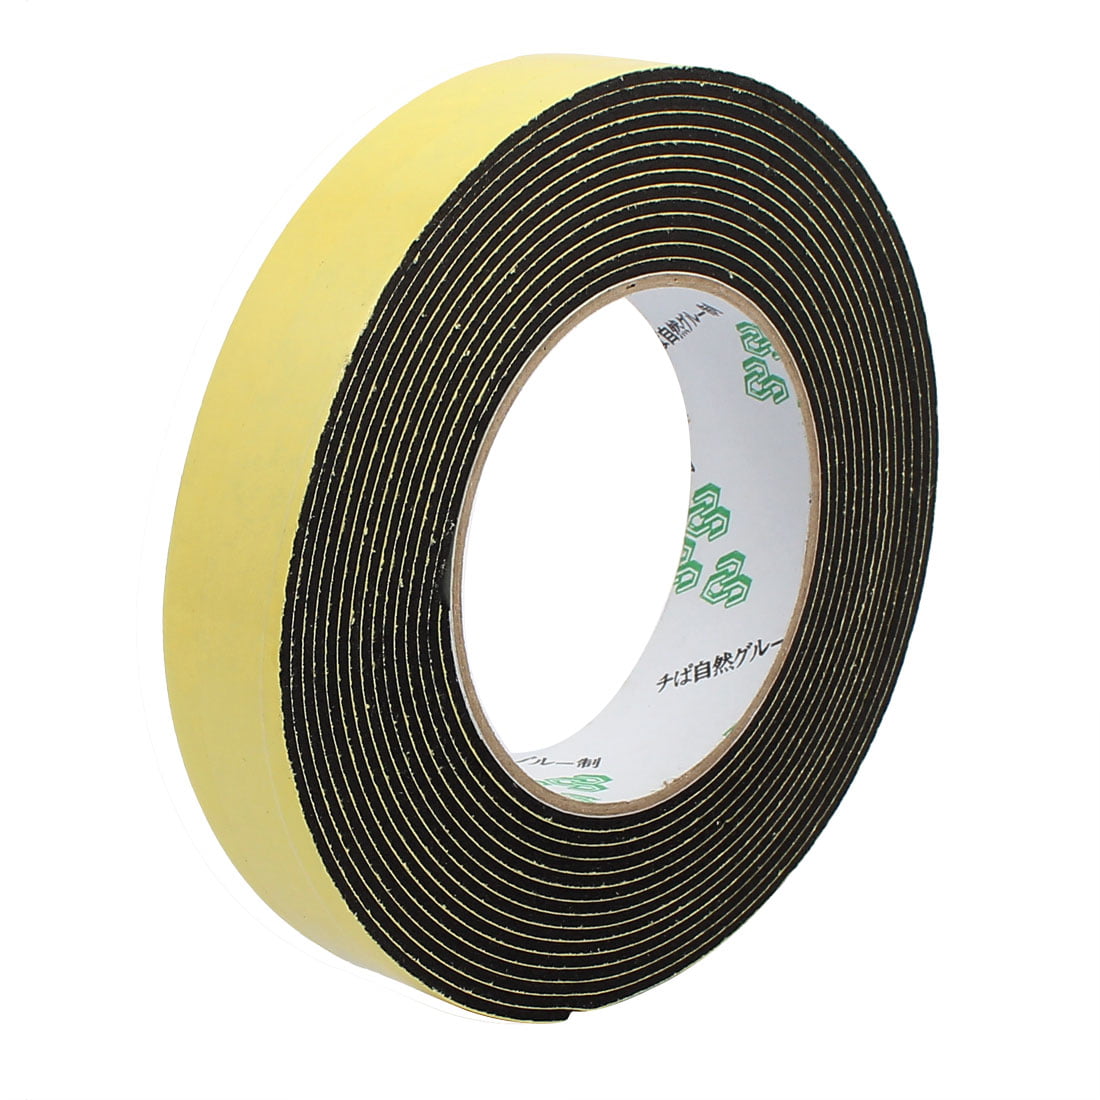 12' 4' Wide Super Strong Acrylic Adhesive Hook and Loop Tape 25m